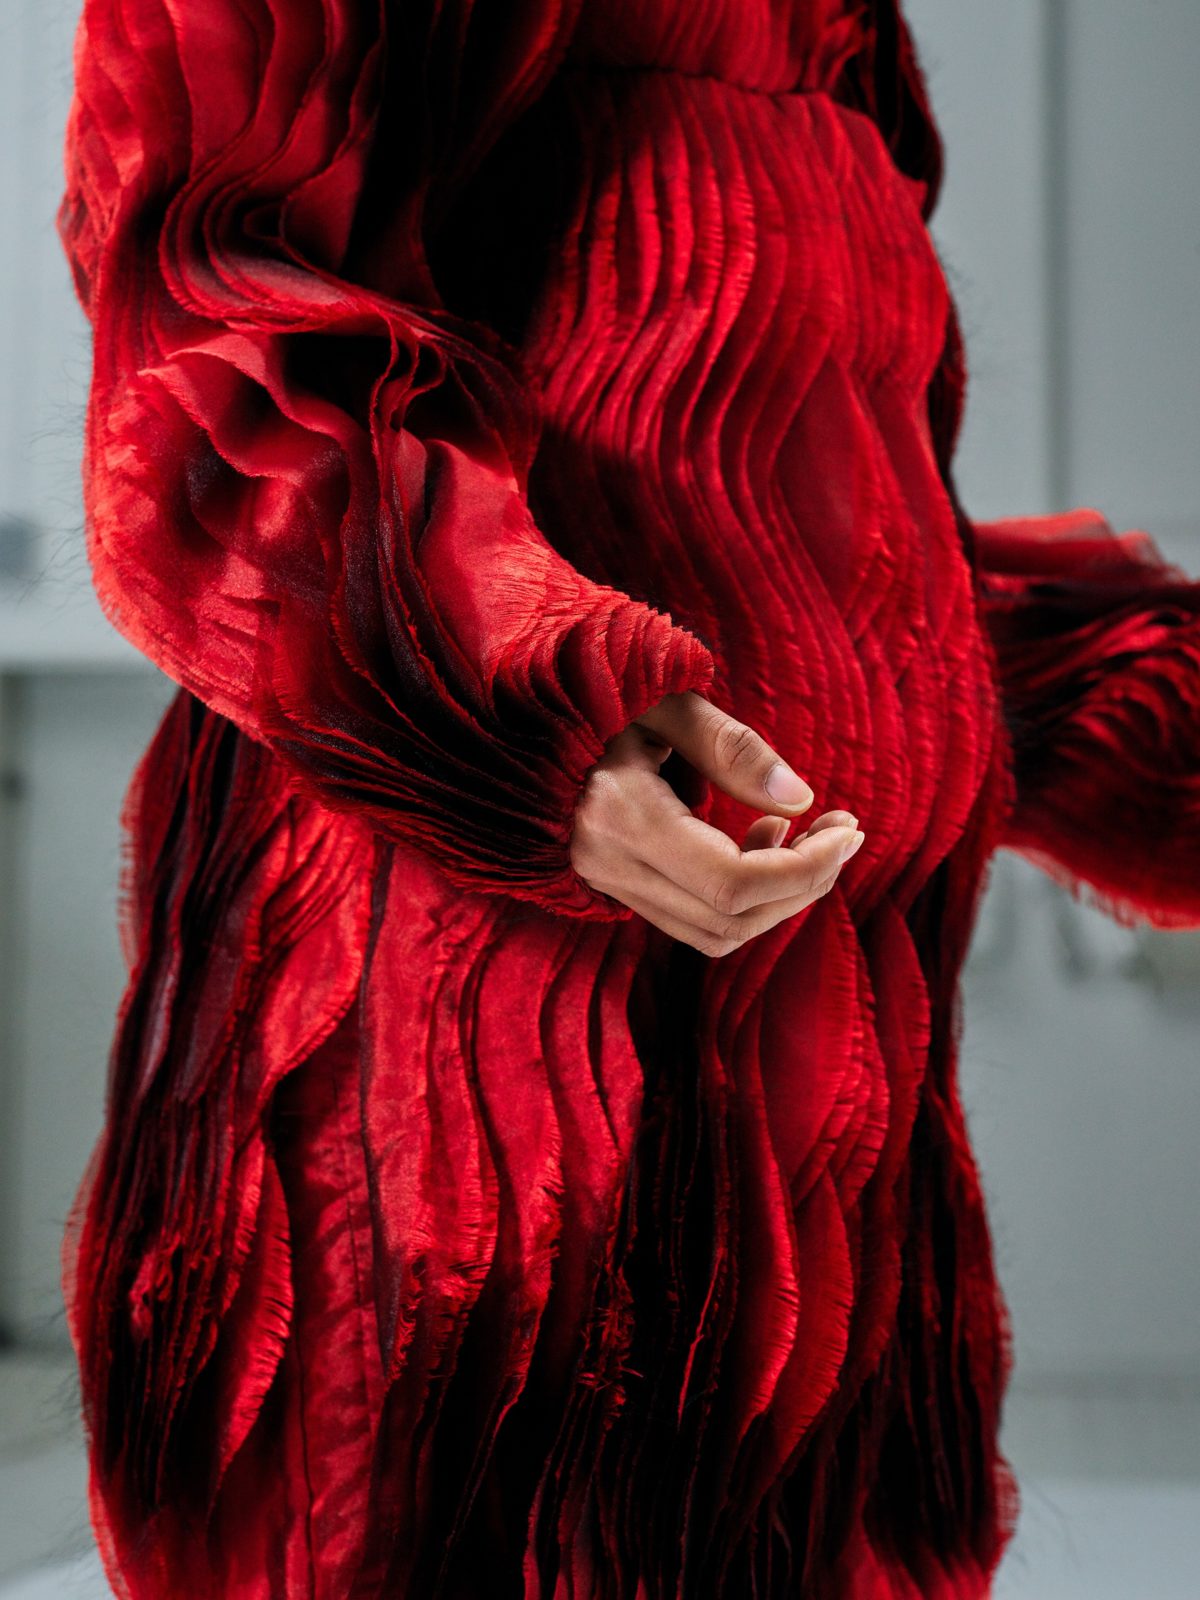 A red piece of clothing with long sleeves and multiple vertical layers with a wavy texture, shadows, and a woman’s hand.